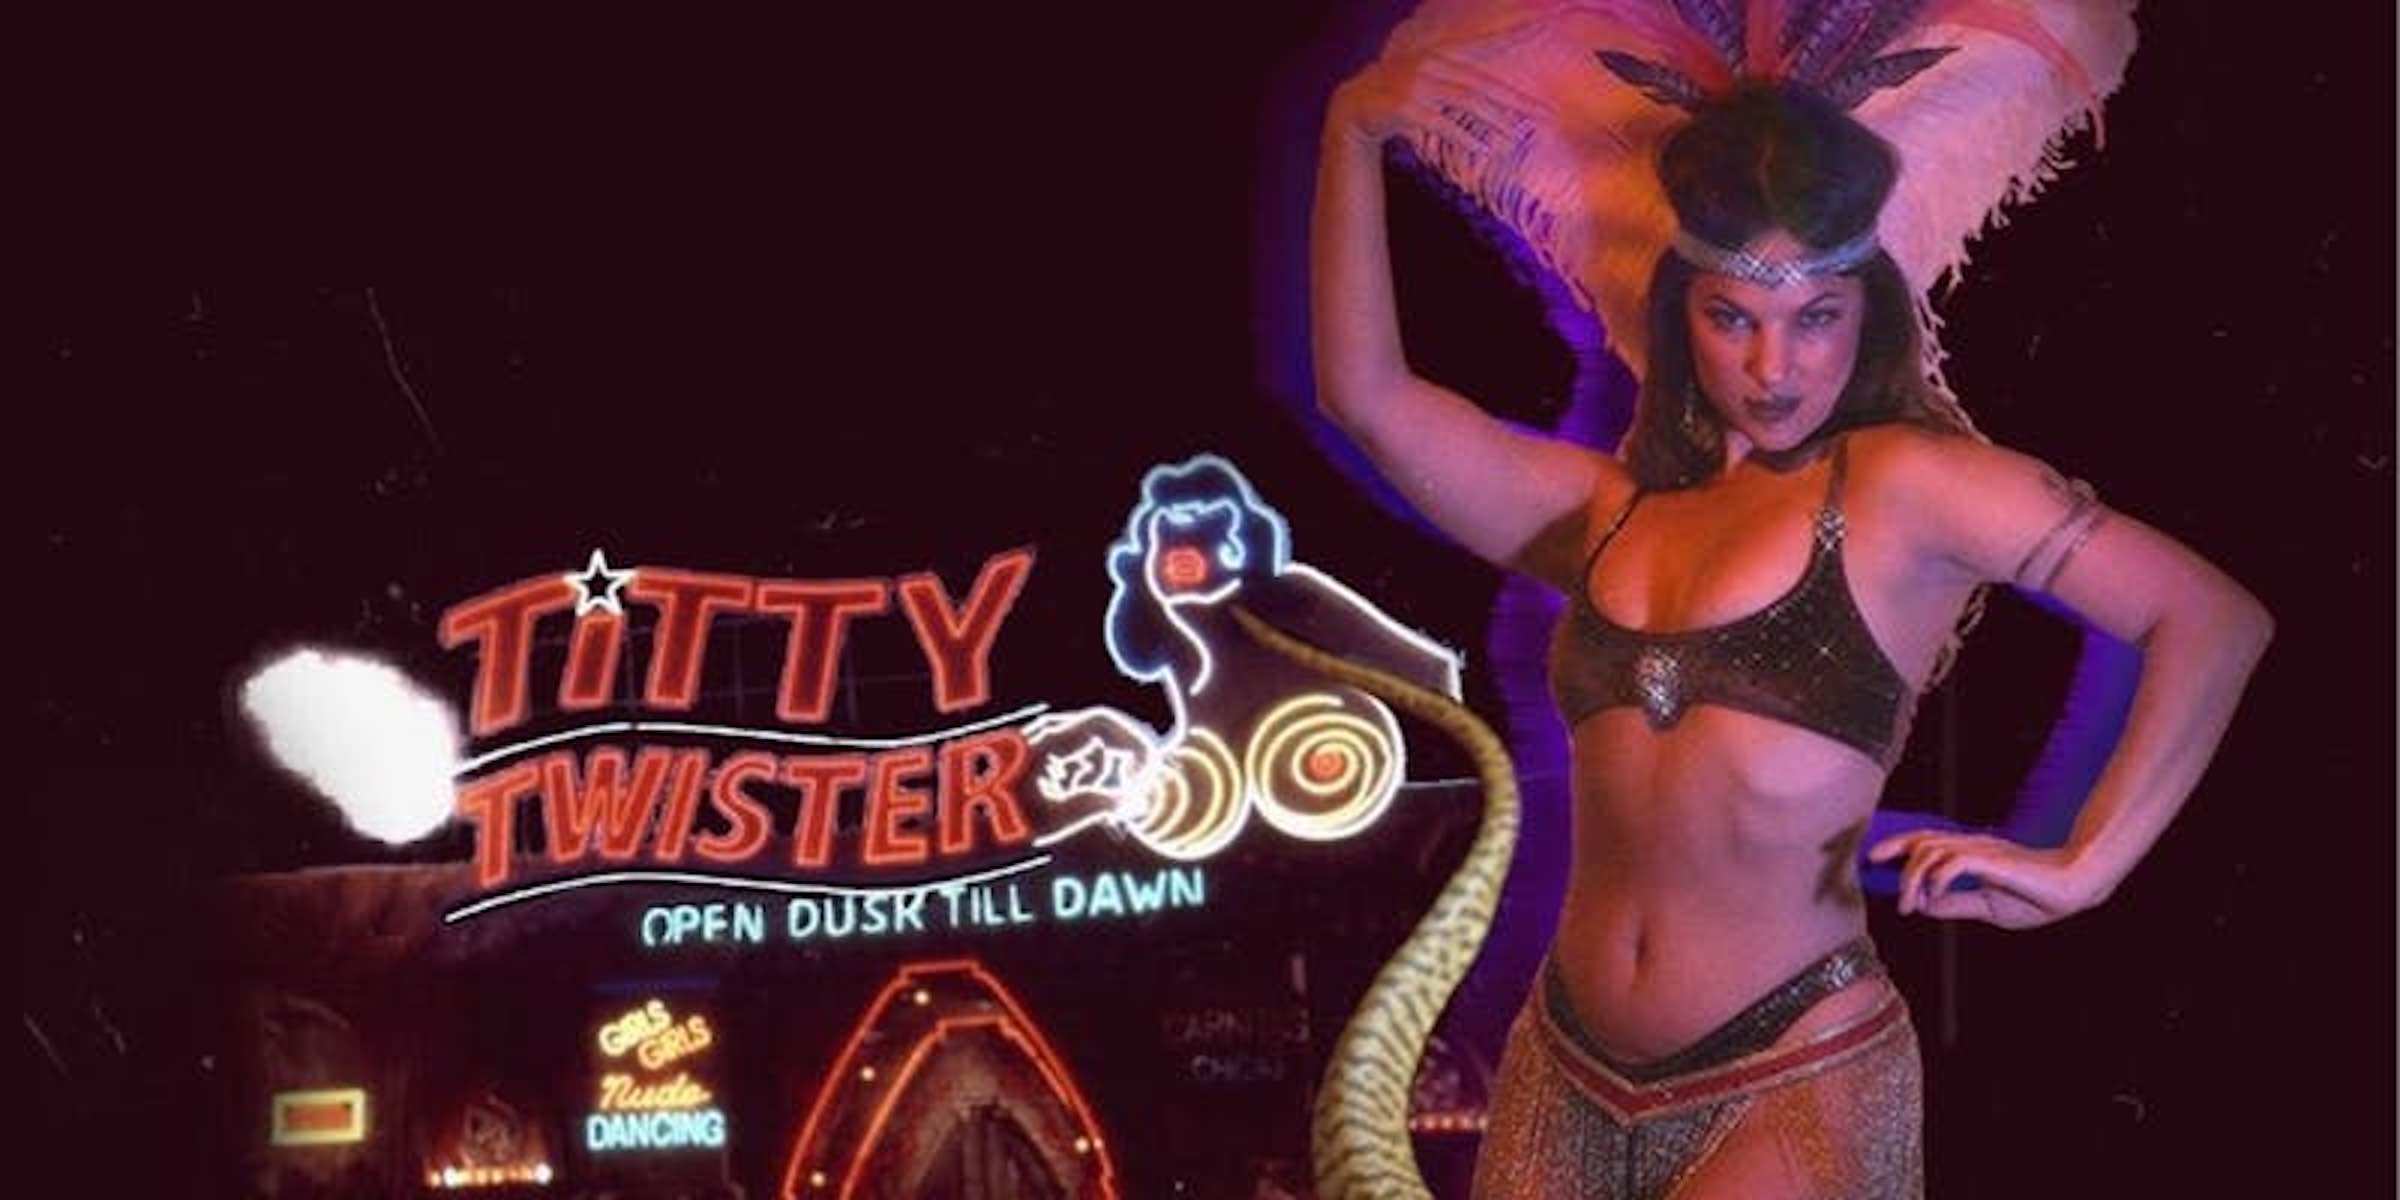 Acrobats, lounge singers, burlesque performers & snake dancers transform Club Bahia into the iconic bar in 'From Dusk till Dawn'. Tarantina is back!